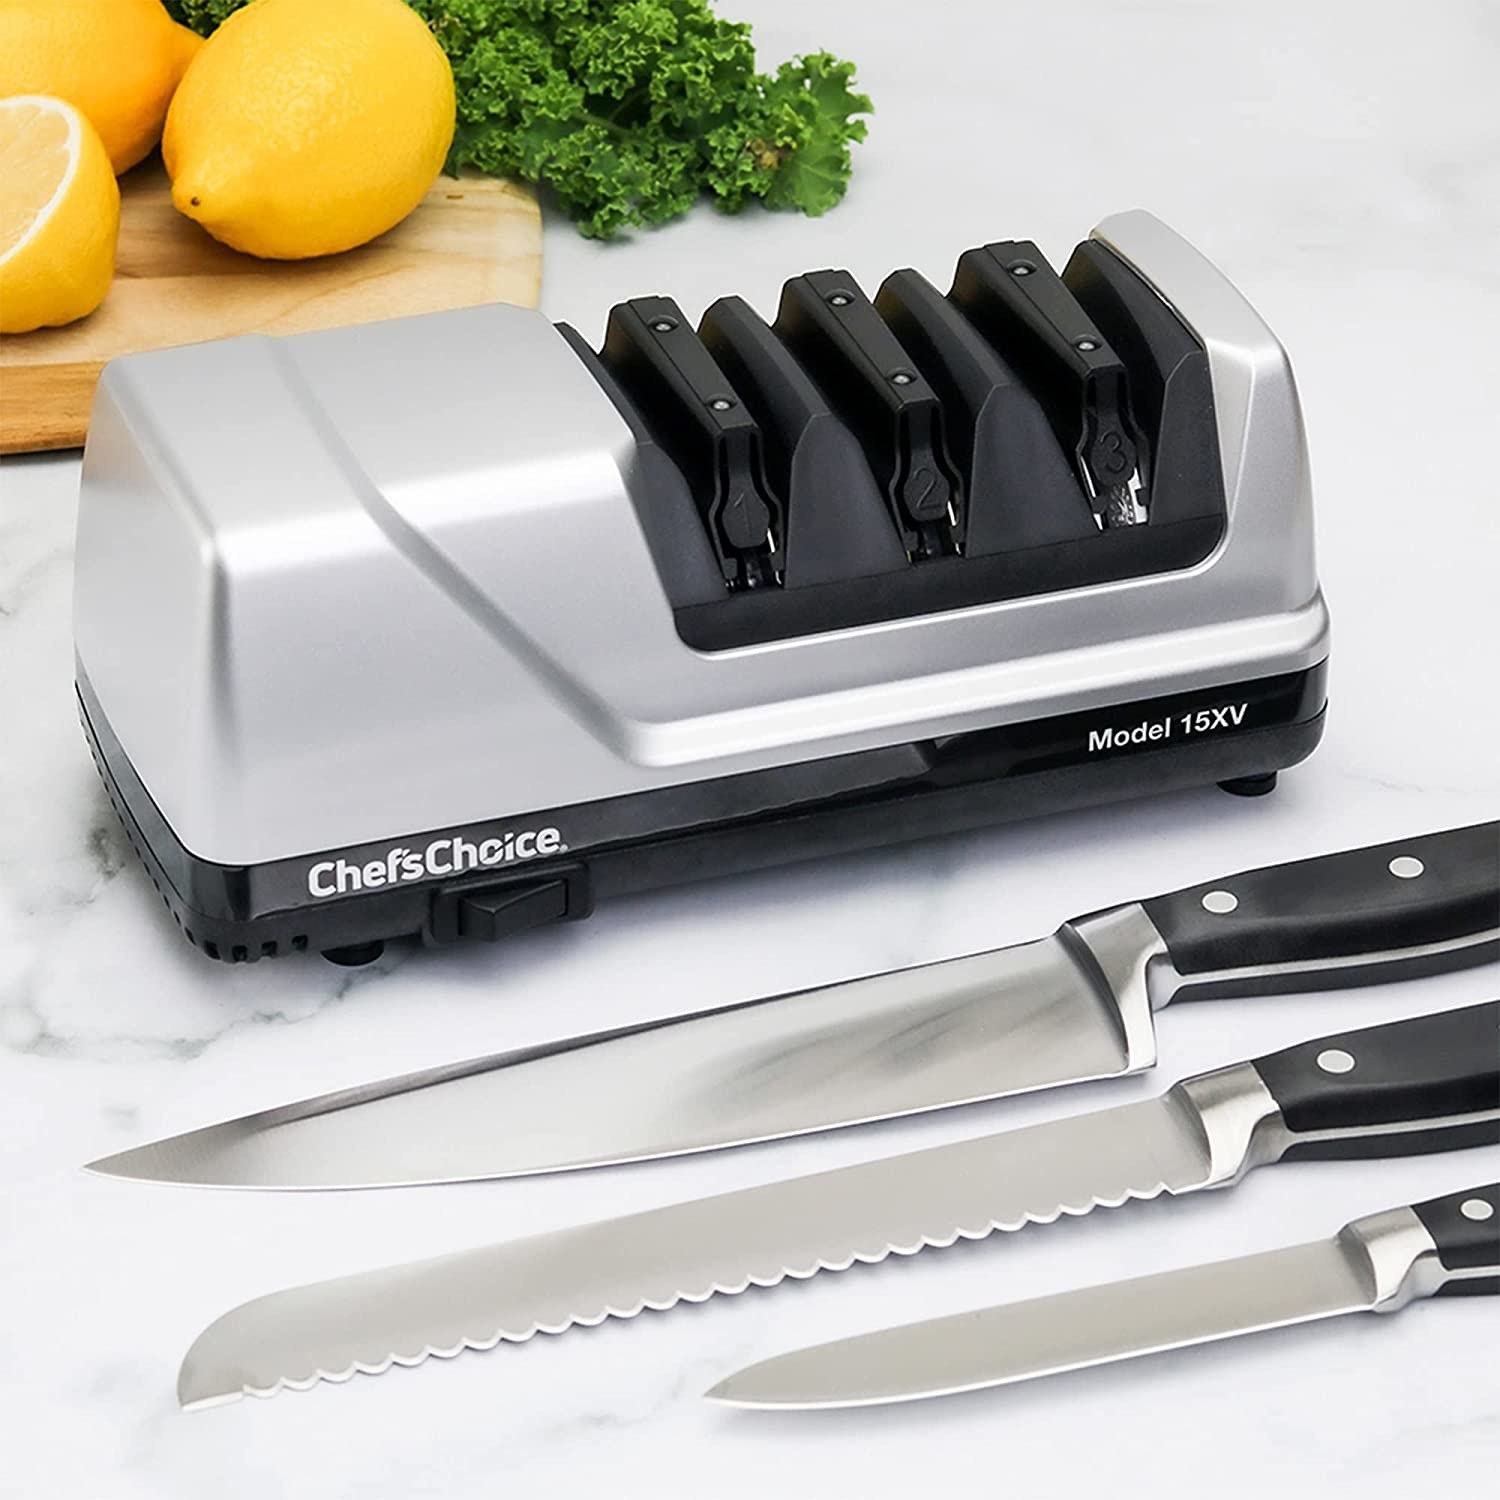 The three-stage model with some knives on a counter